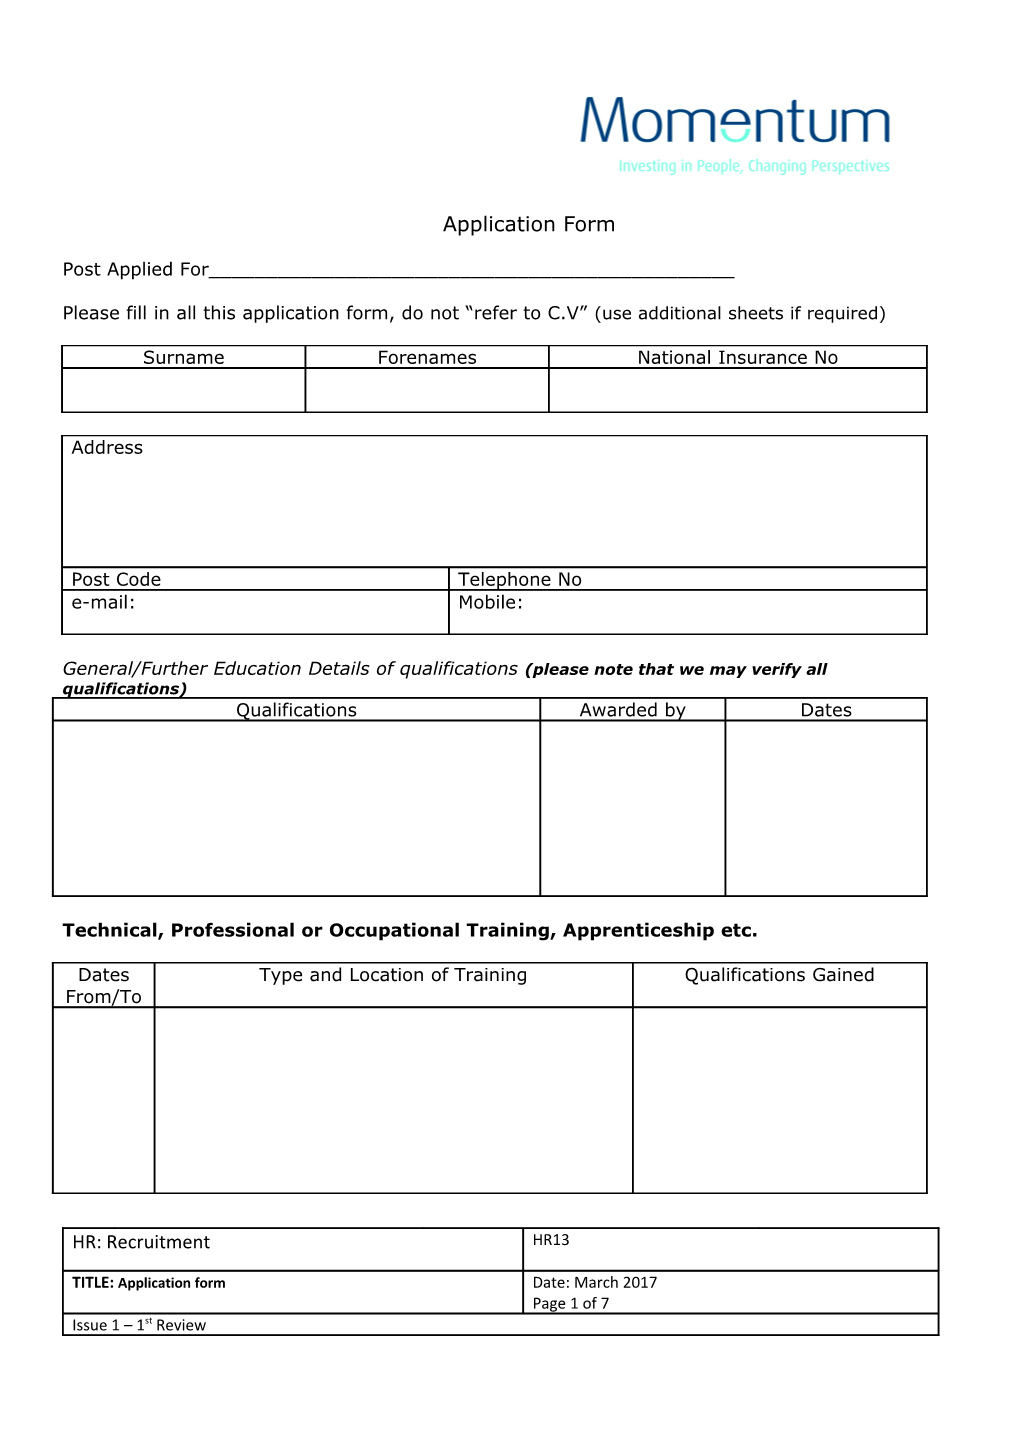 Application Form s76